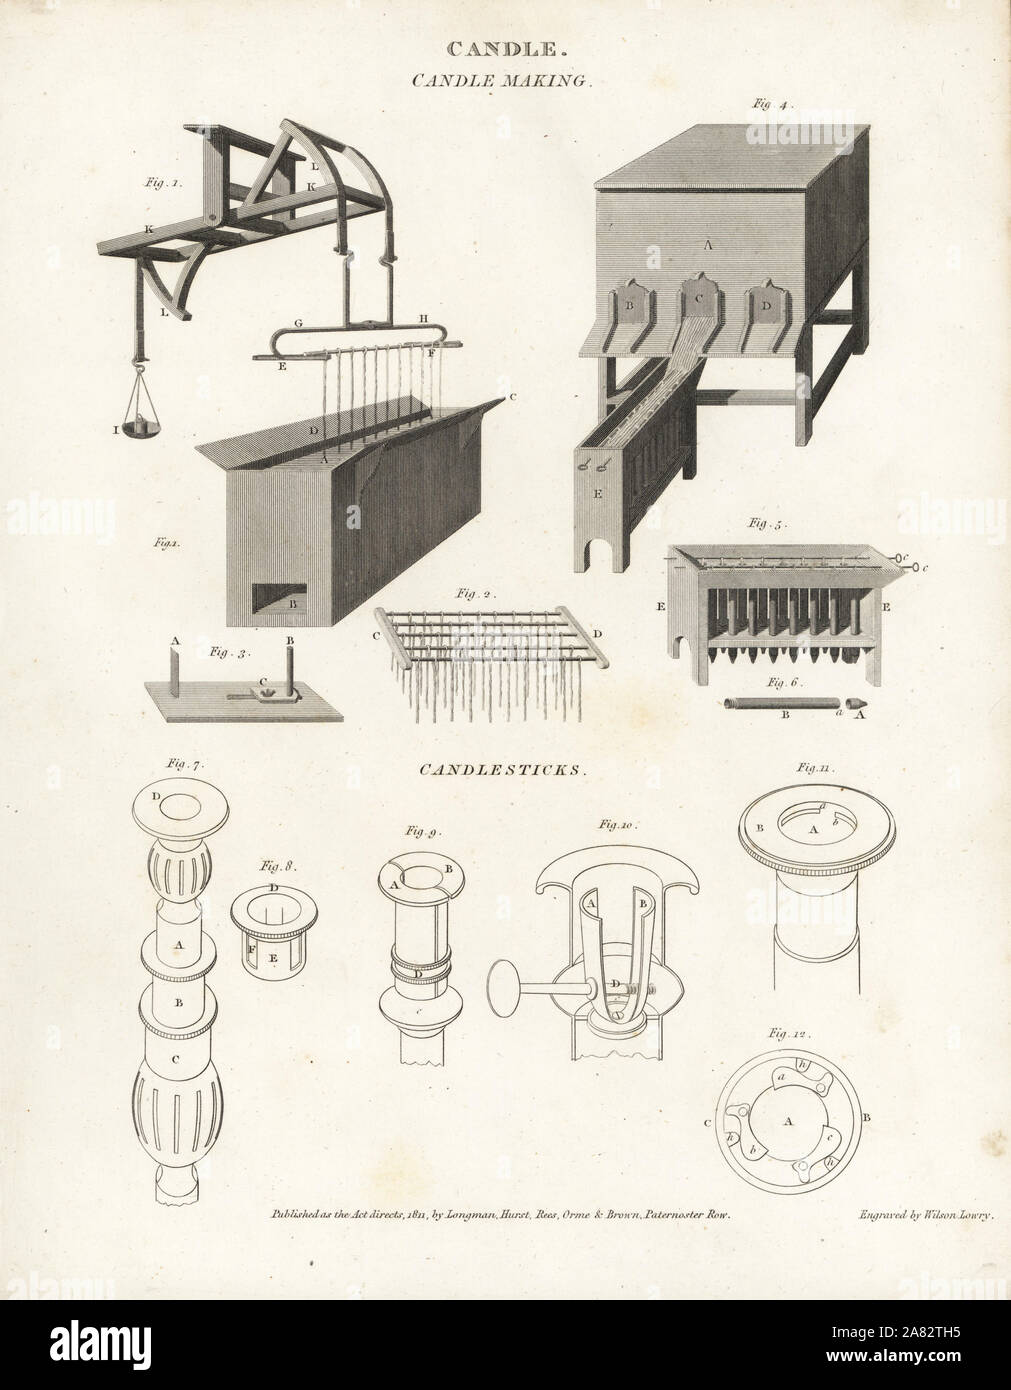 Candle-making equipment: dipping apparatus 1, wick broach 2, cotton-cutting machine 3, tallow cistern for mould candles 4, mould frame 5, mould 6 and candlesticks 7-12. Copperplate engraving by Wilson Lowry from Abraham Rees' Cyclopedia or Universal Dictionary of Arts, Sciences and Literature, Longman, Hurst, Rees, Orme and Brown, London, 1812. Stock Photo